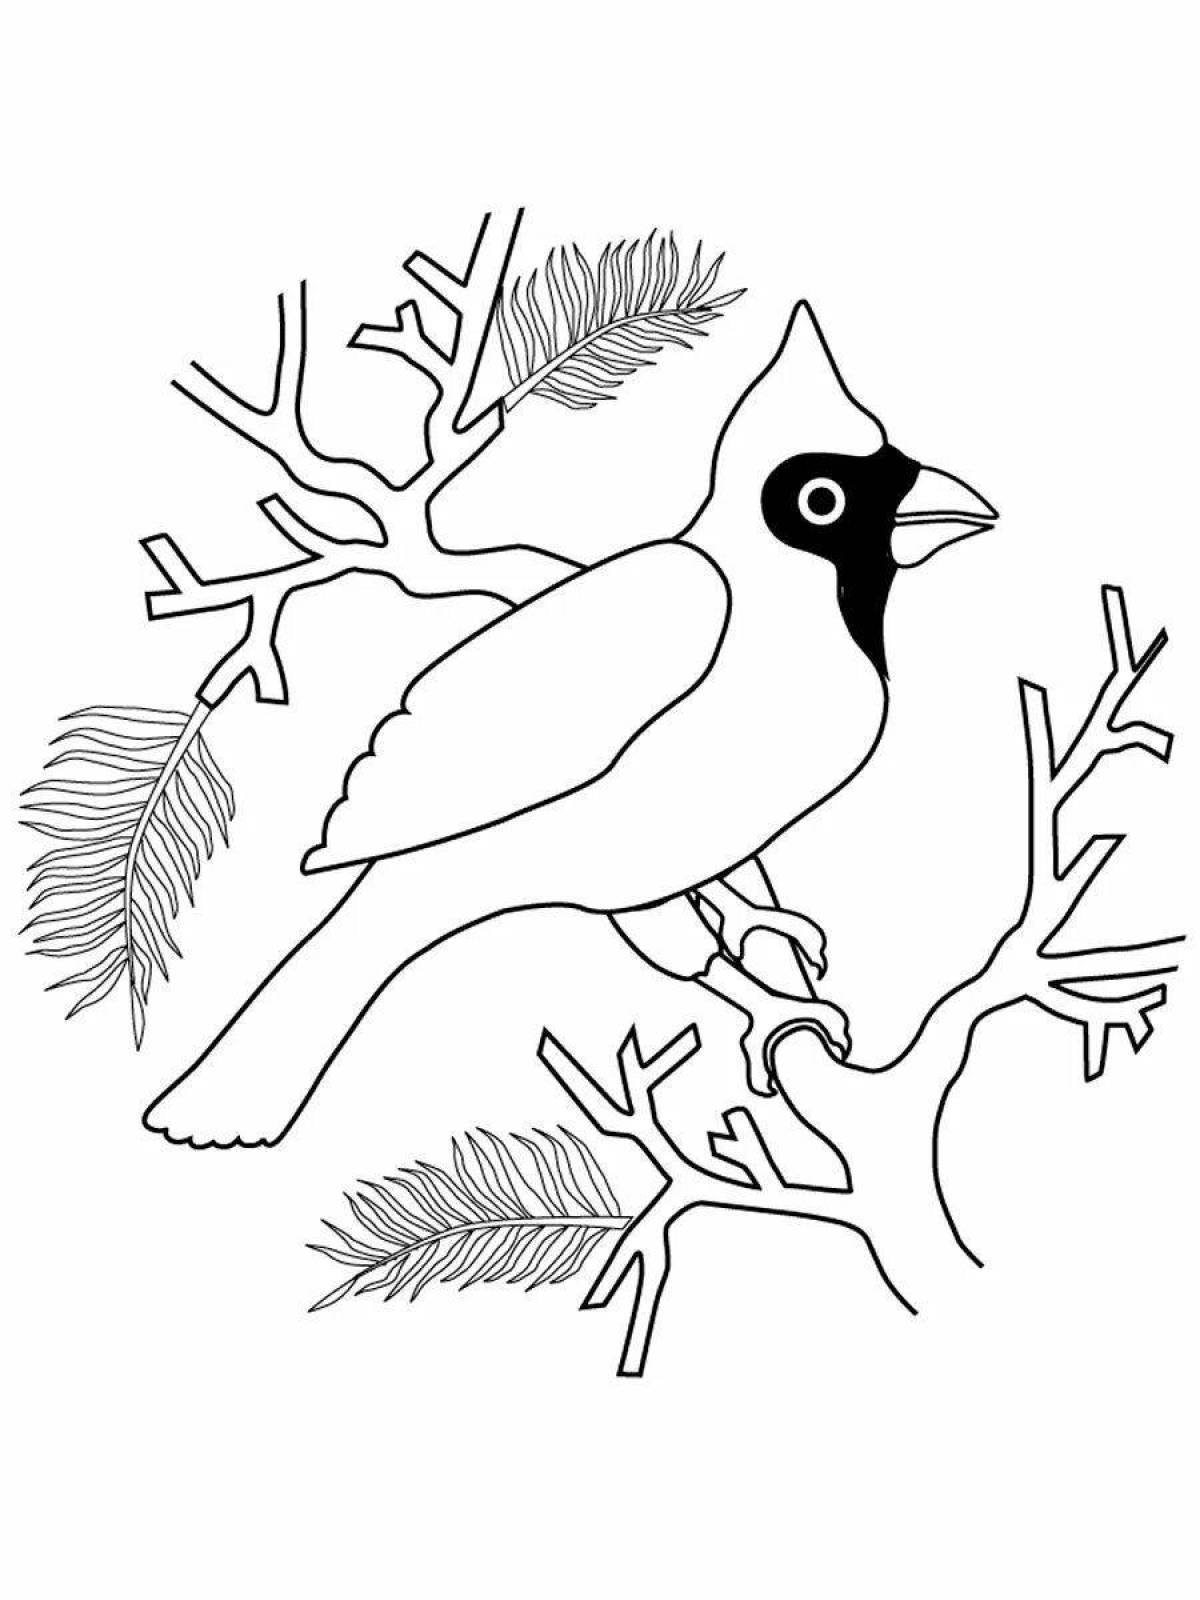 Awesome winter bird coloring pages for little ones